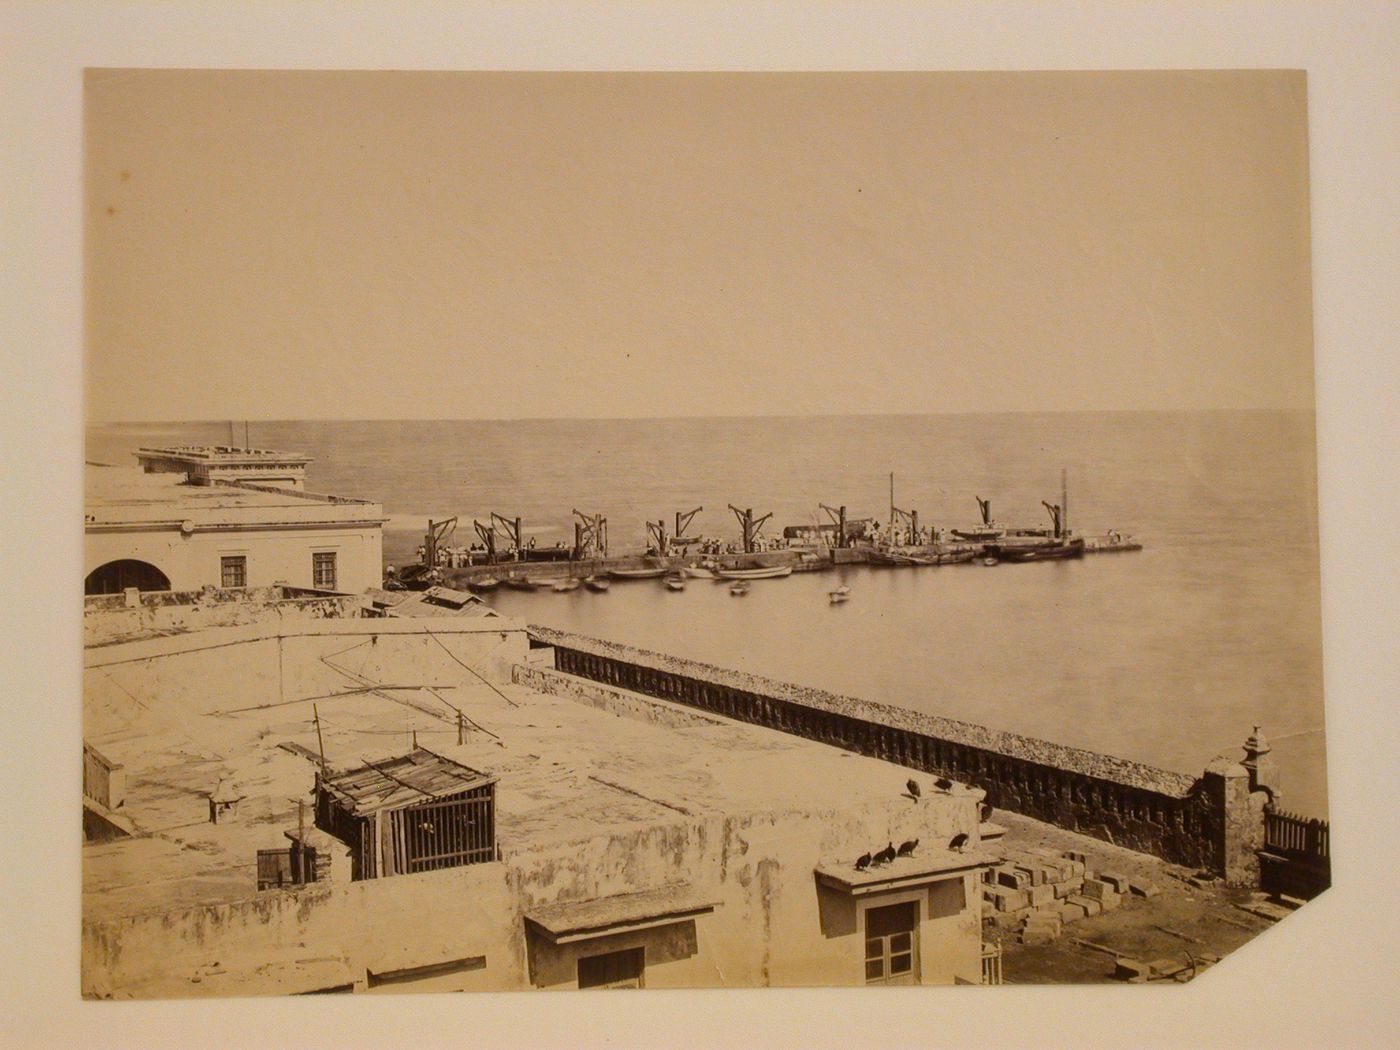 View of buildings and a pier with boats and people with the Gulf of Mexico in the background, Veracruz, Mexico